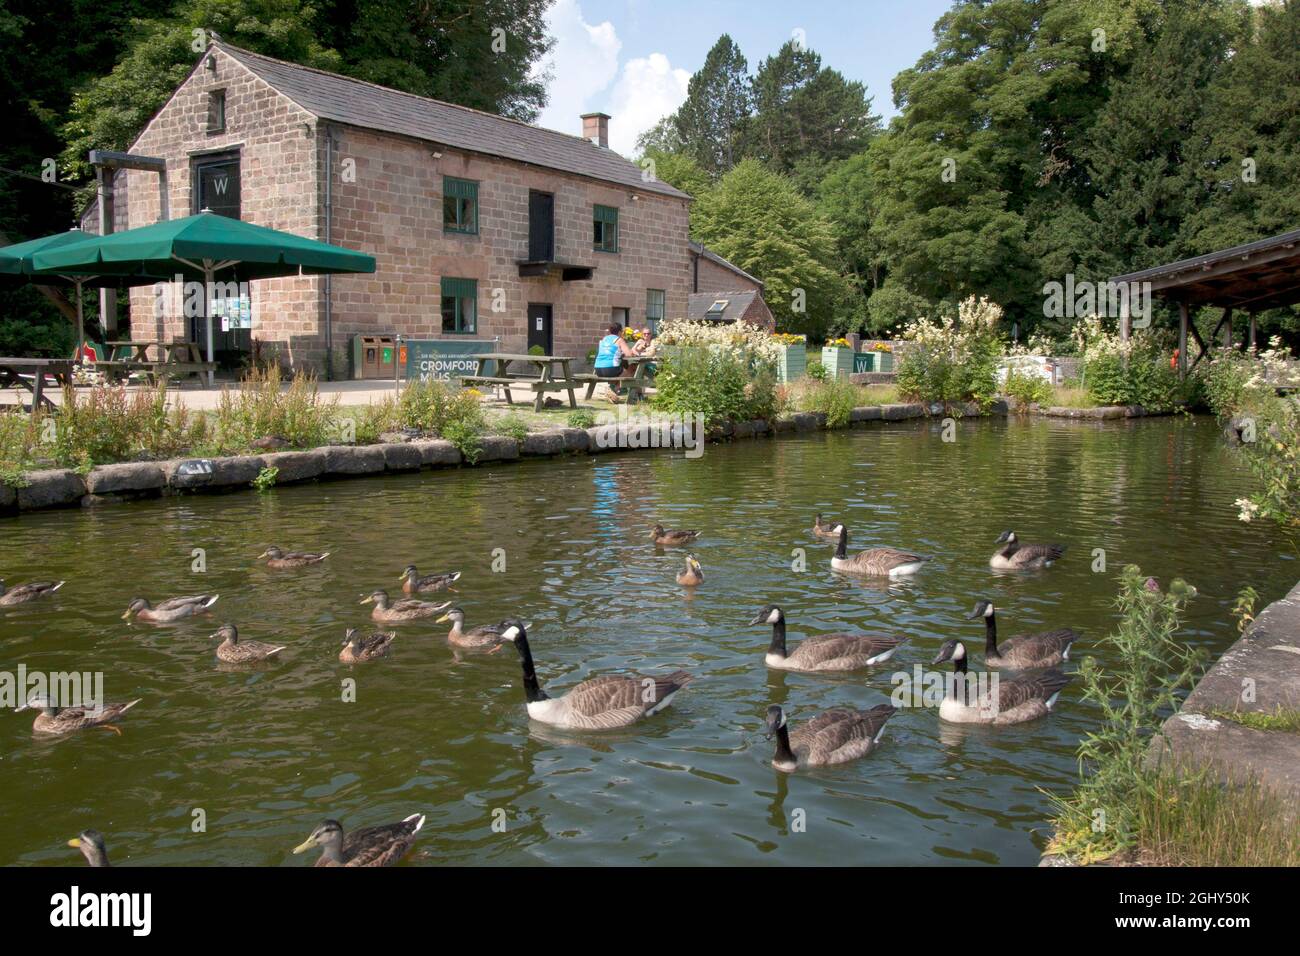 Quai de Cromford Canal, Arkwrights Mill, Cromford nr Matlock, Derbyshire, Angleterre Banque D'Images